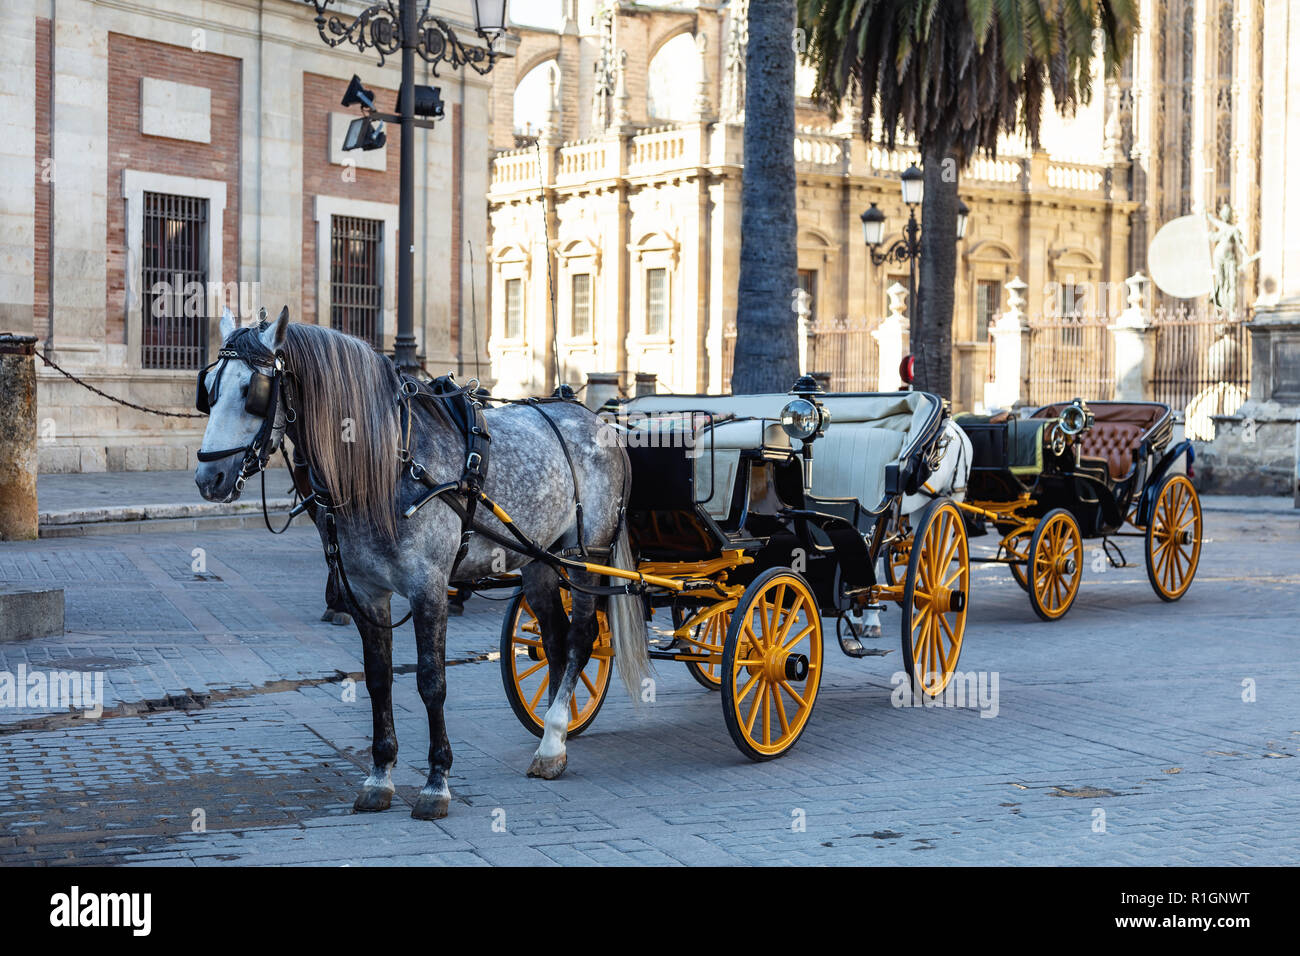 Carriage ride : Seville, Andalusia, Spain Stock Photo